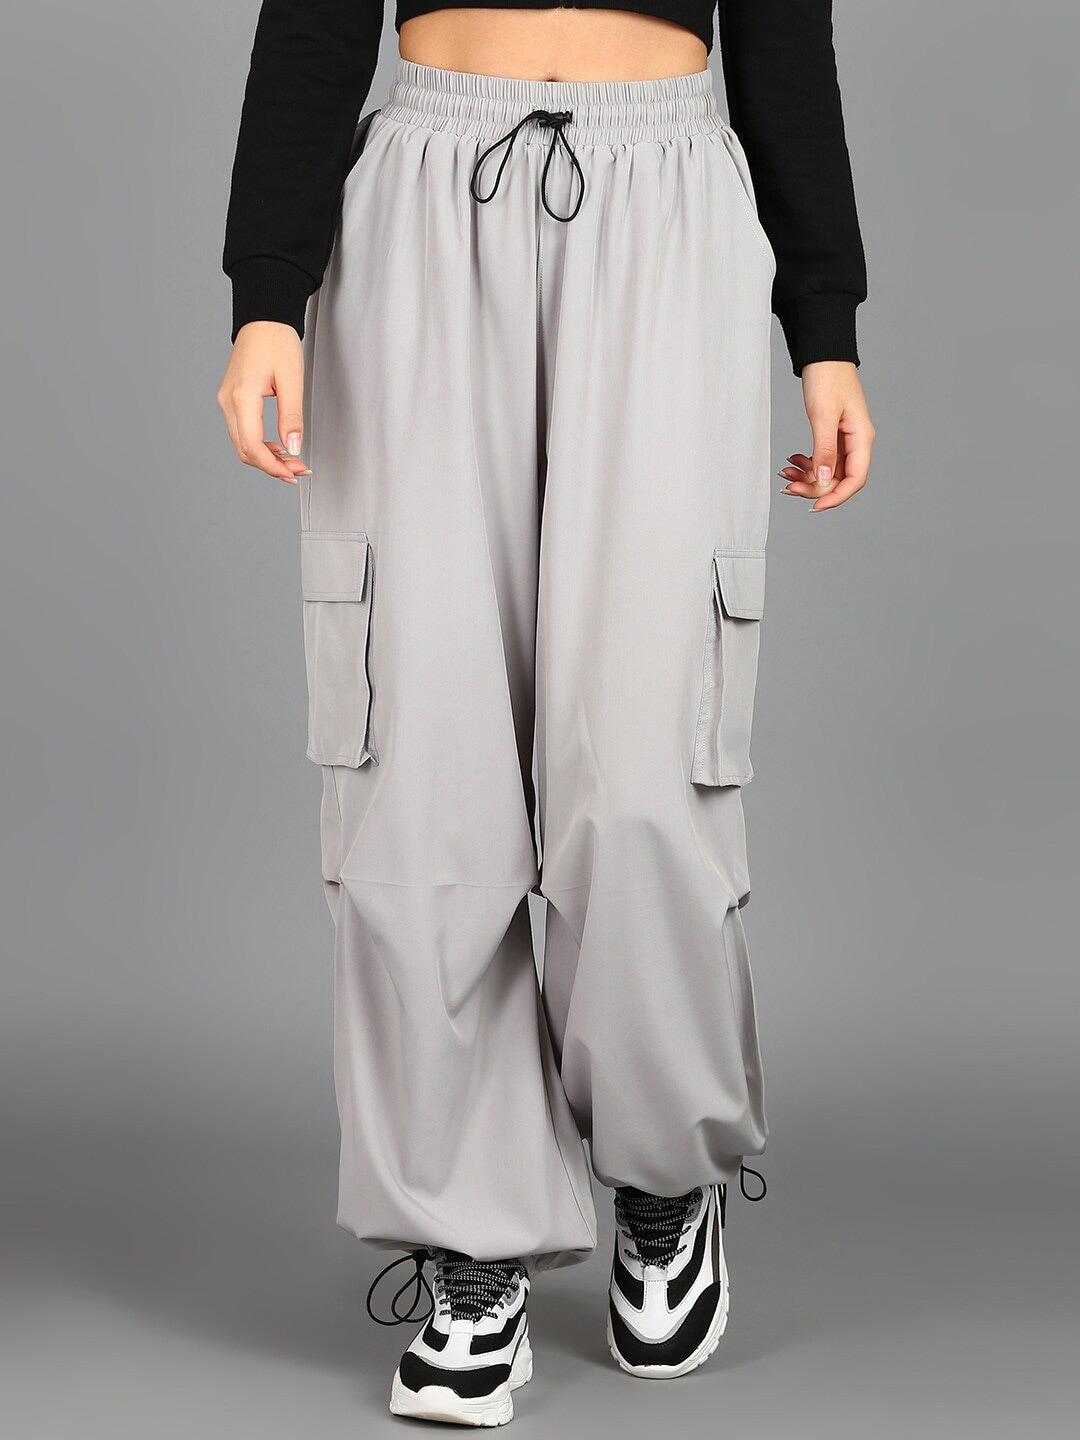 the-roadster-lifestyle-co.-women-mid-rise-parachute-joggers